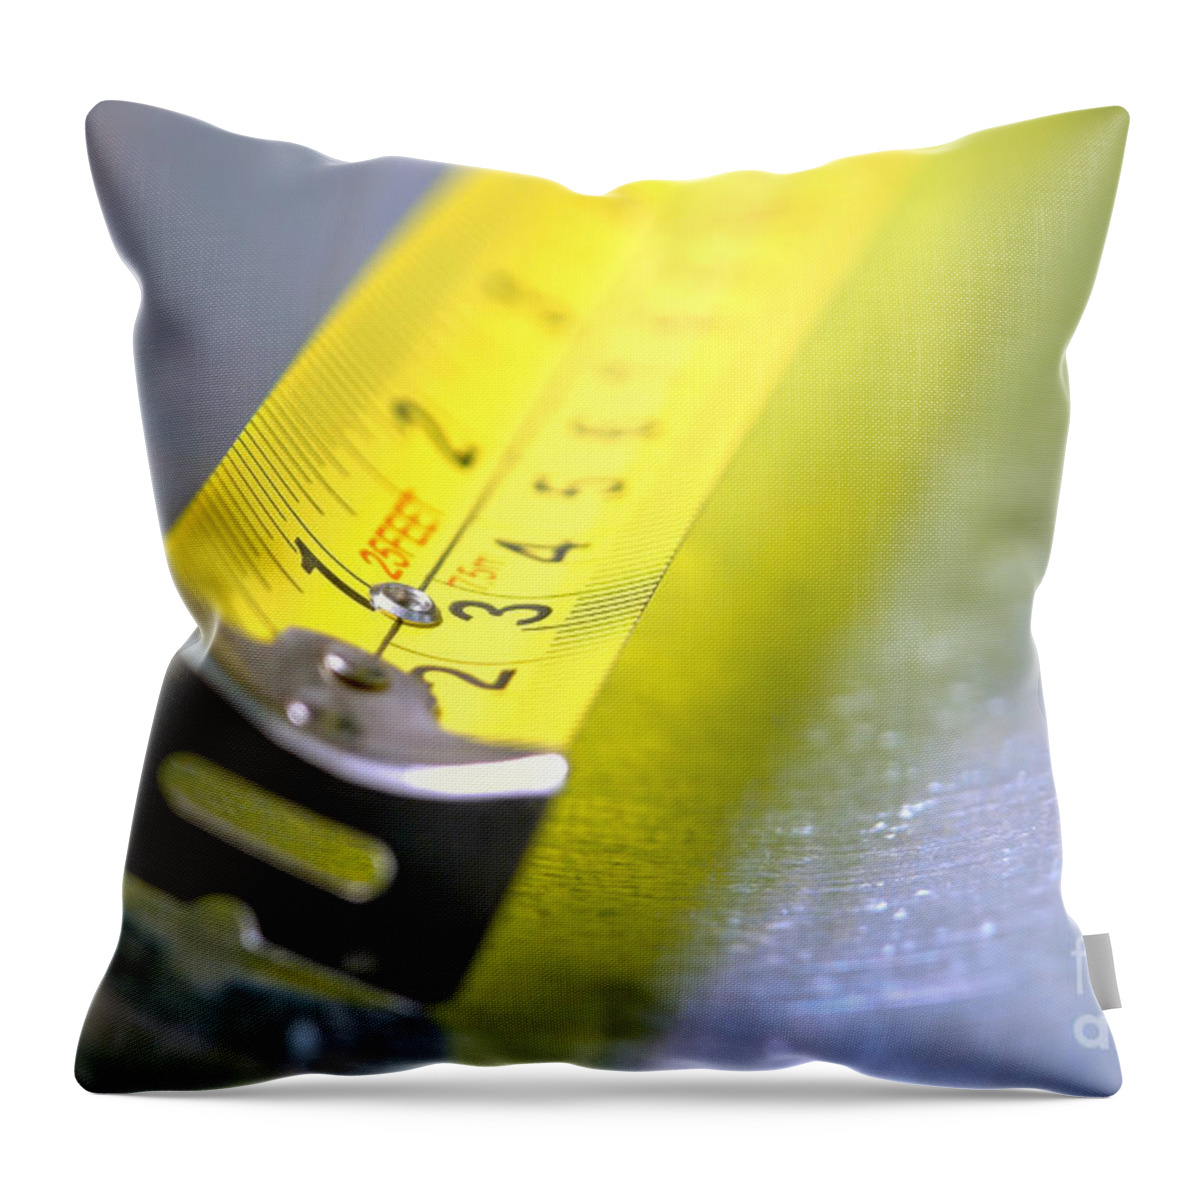 Carpentry Throw Pillow featuring the photograph Construction Retracting Tape Measure by Olivier Le Queinec